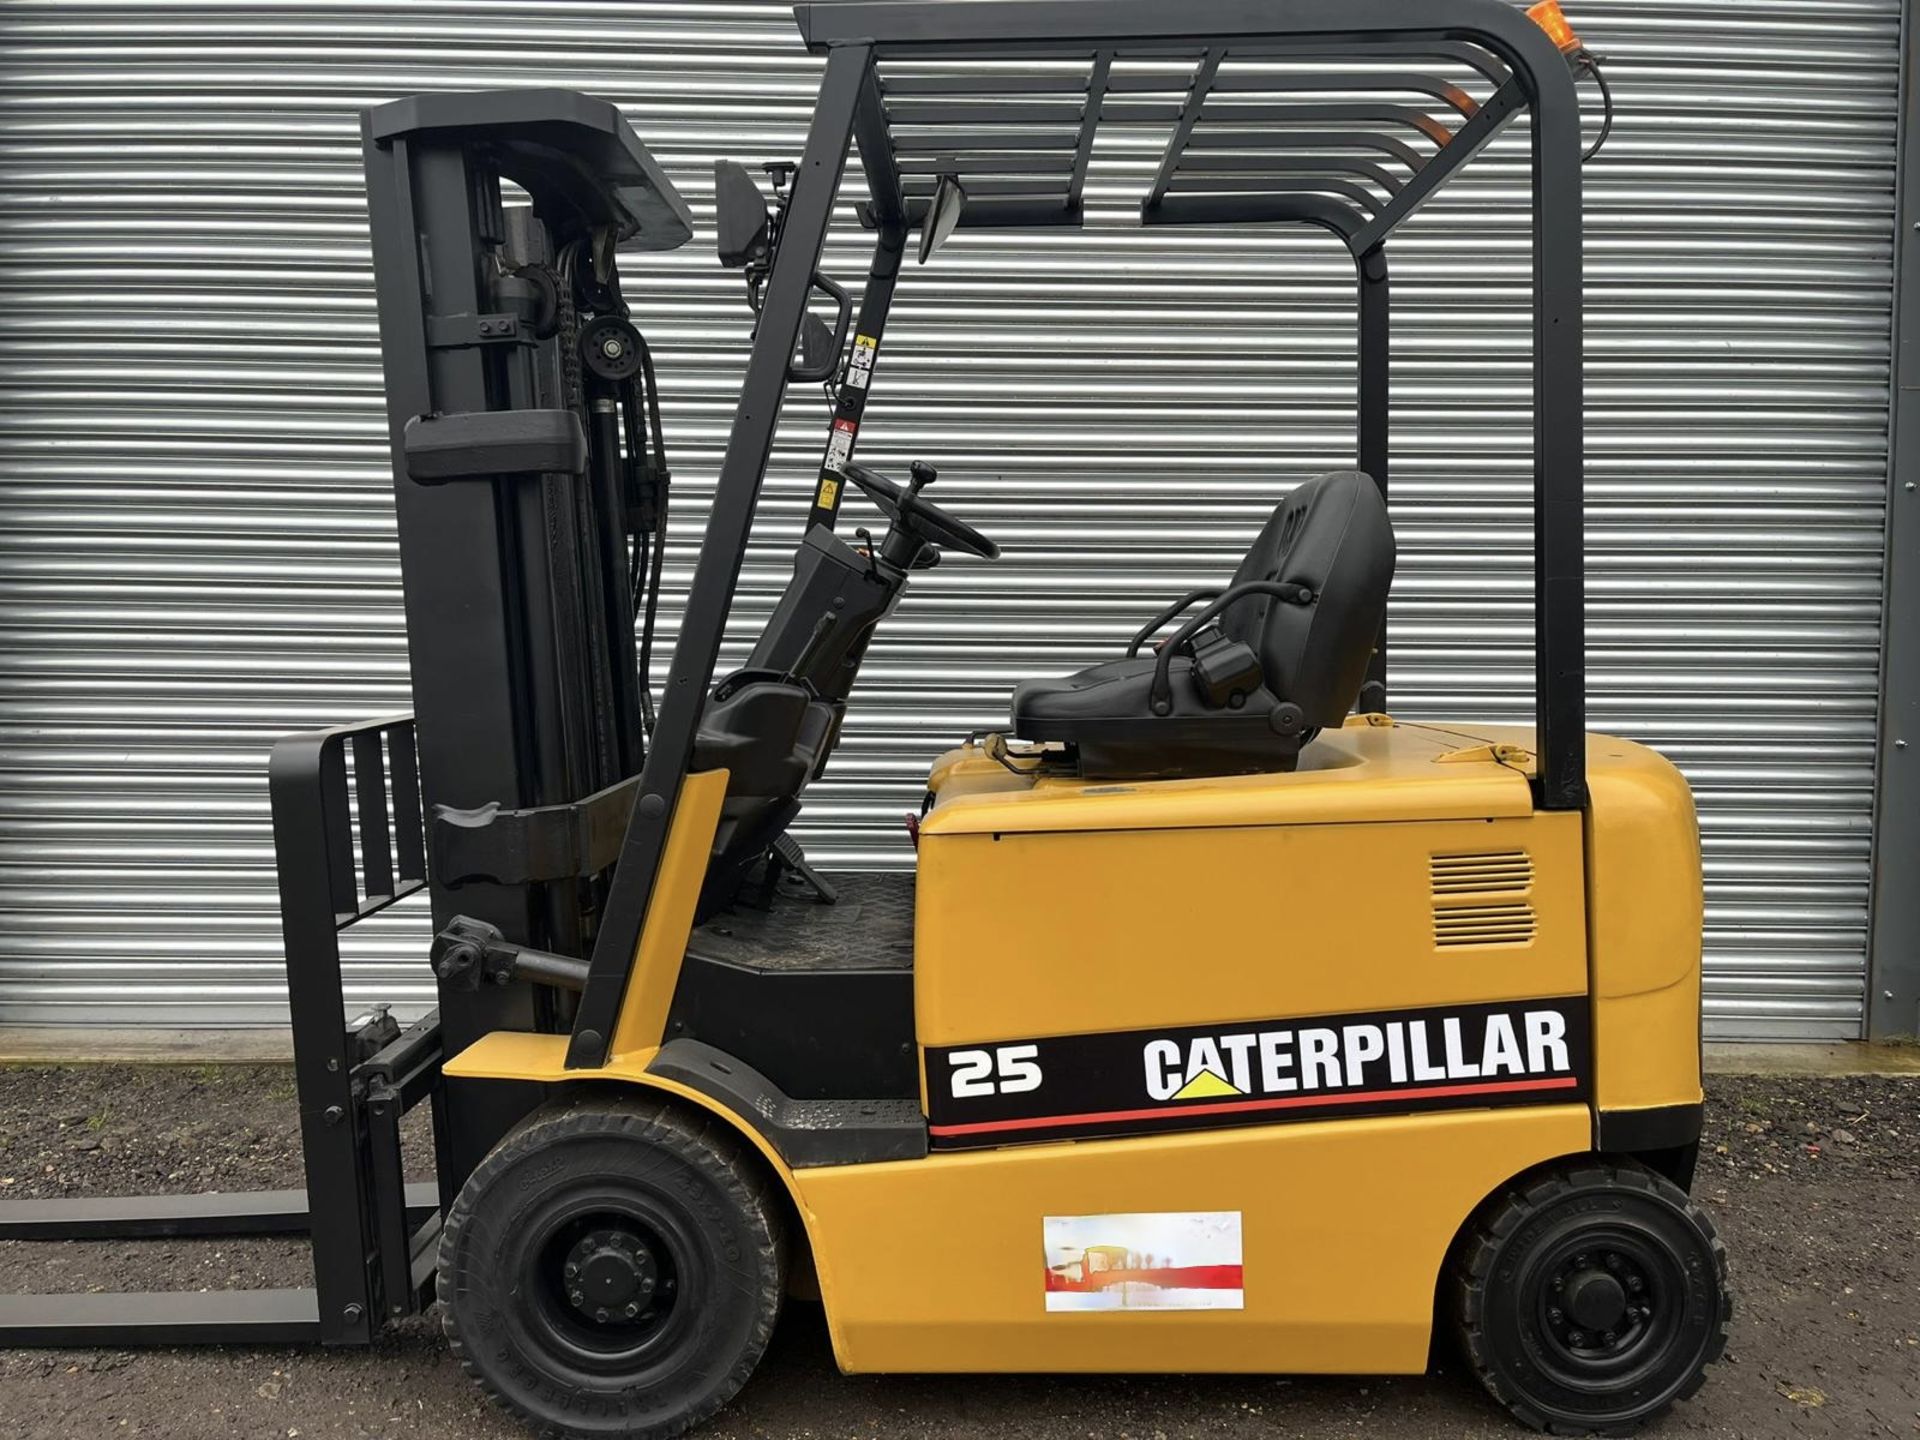 2014 - CATERPILLAR, EP25, 2.5 Tonne Electric Forklift - Image 7 of 7